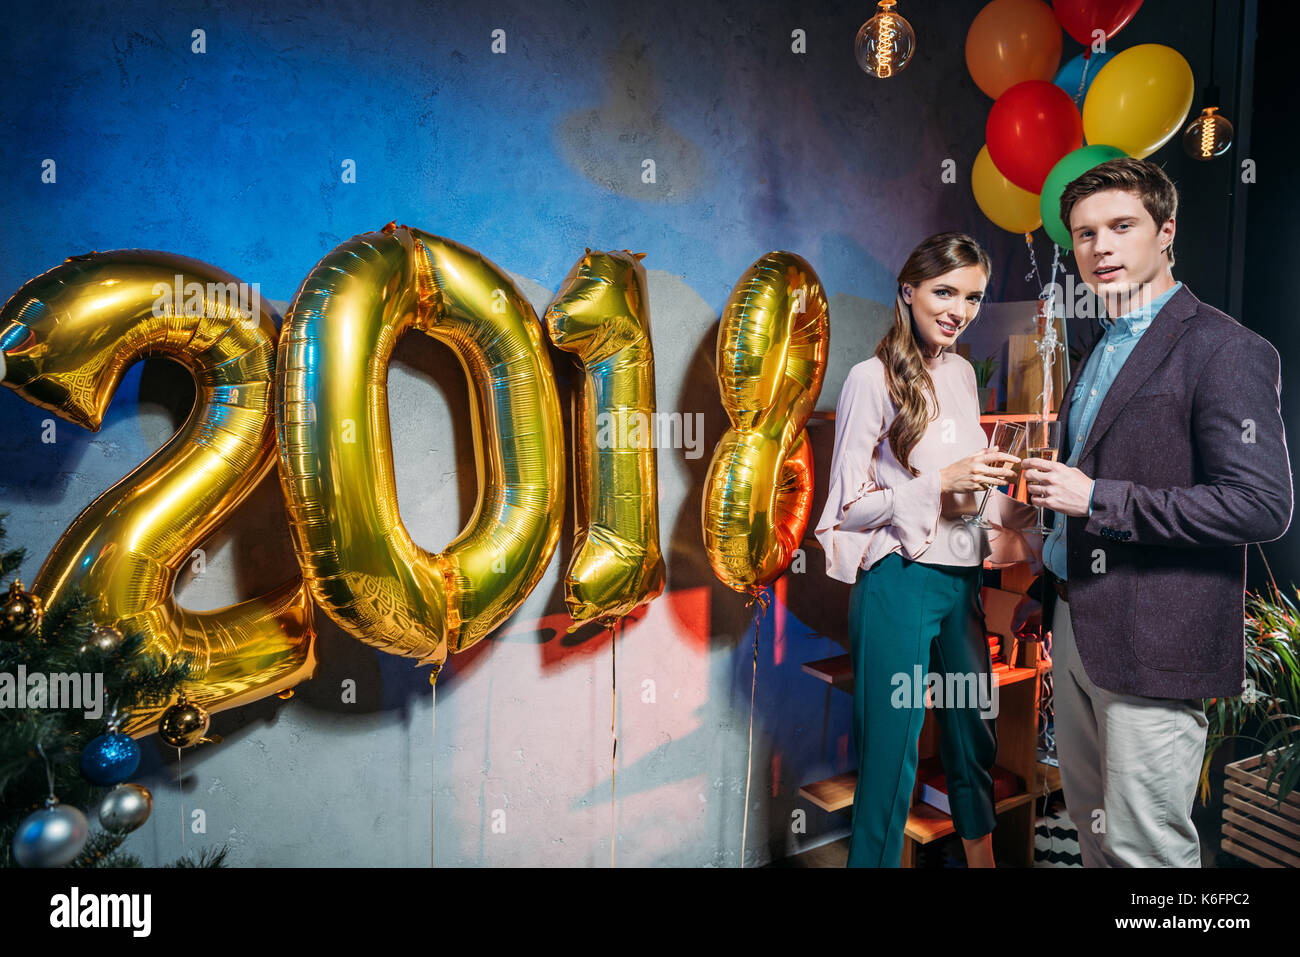 couple at new year party Stock Photo